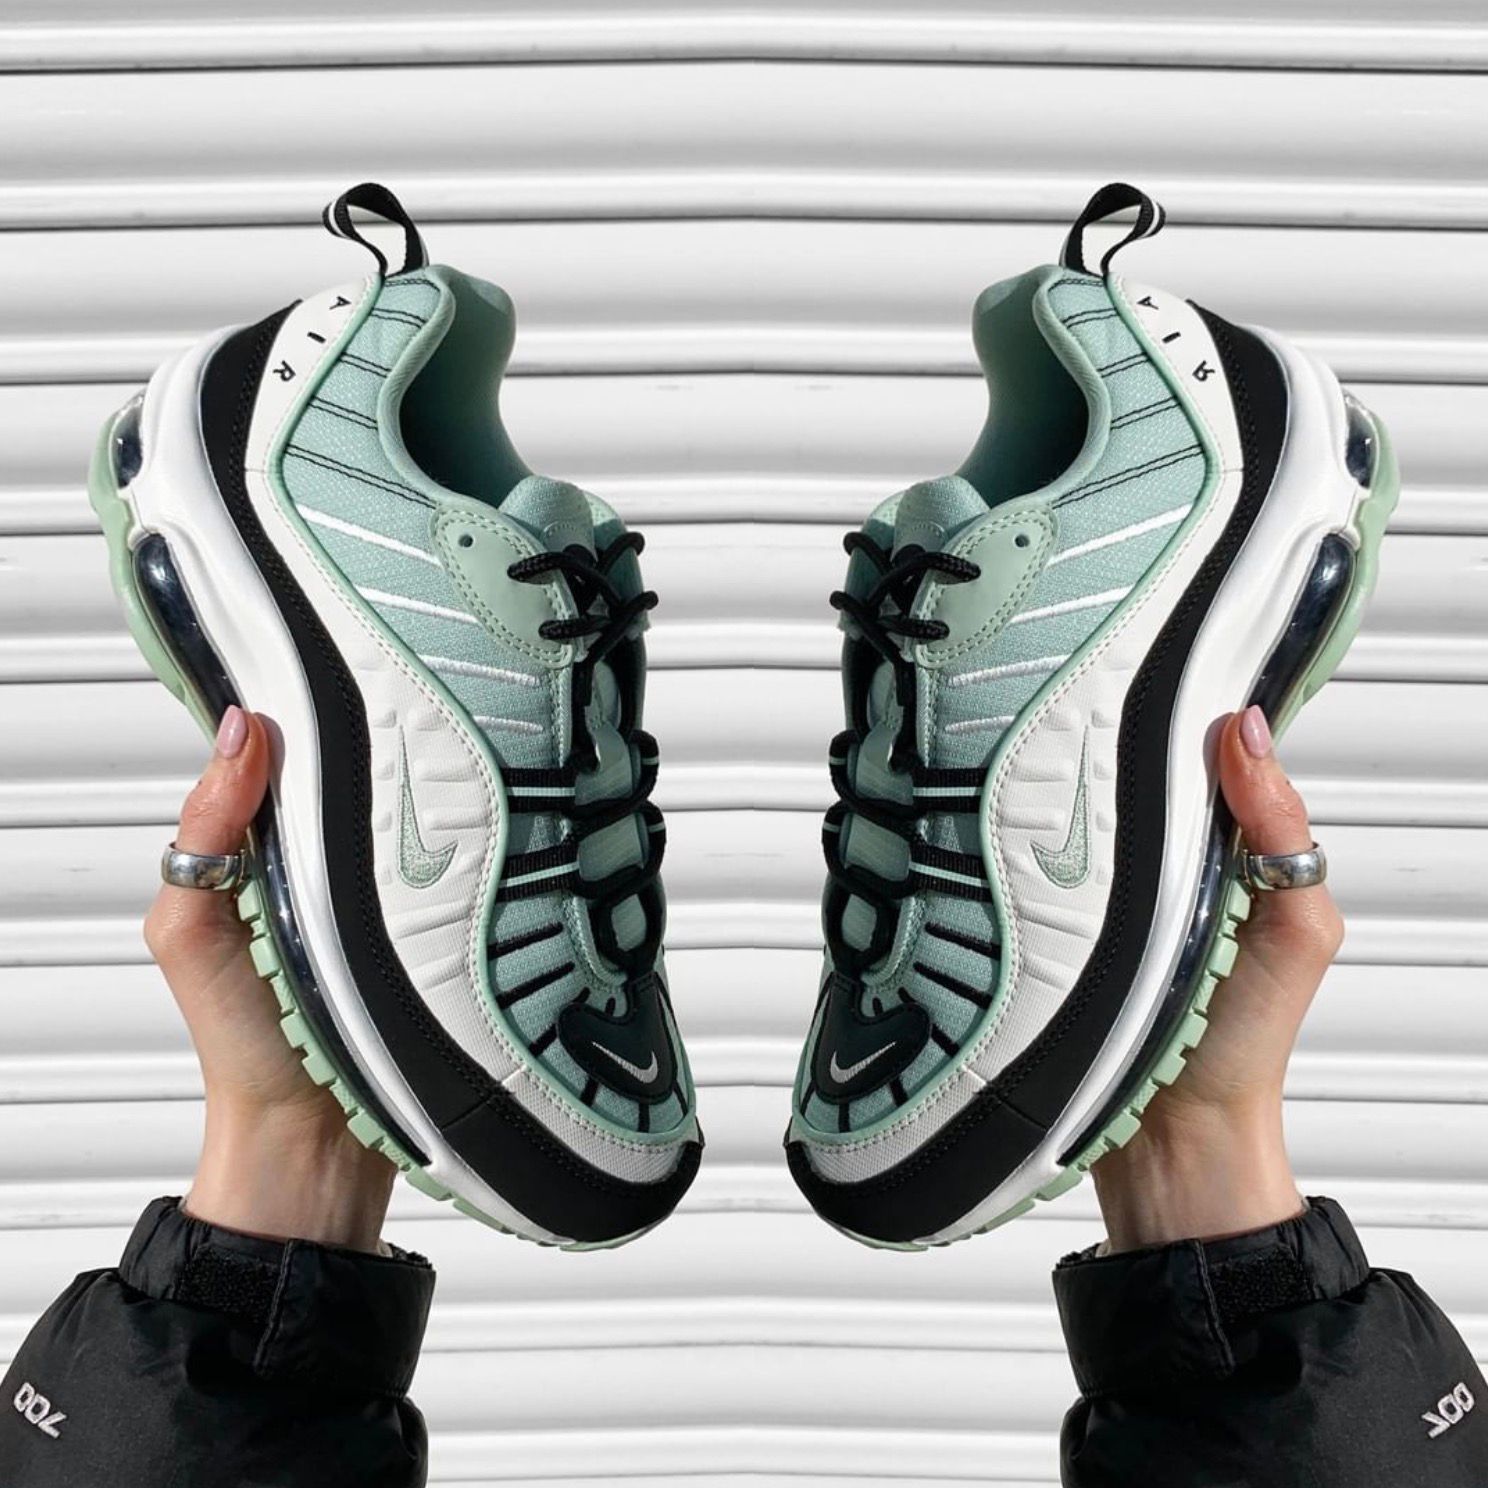 The Womens on Twitter: "Cop the Air Max 98 Pistachio Frost for just £75 with the code 'EXTRA2020' 💚 https://t.co/DKH7EKYz9P 📷thesolewomens https://t.co/Ll8vrzA2xv" / Twitter